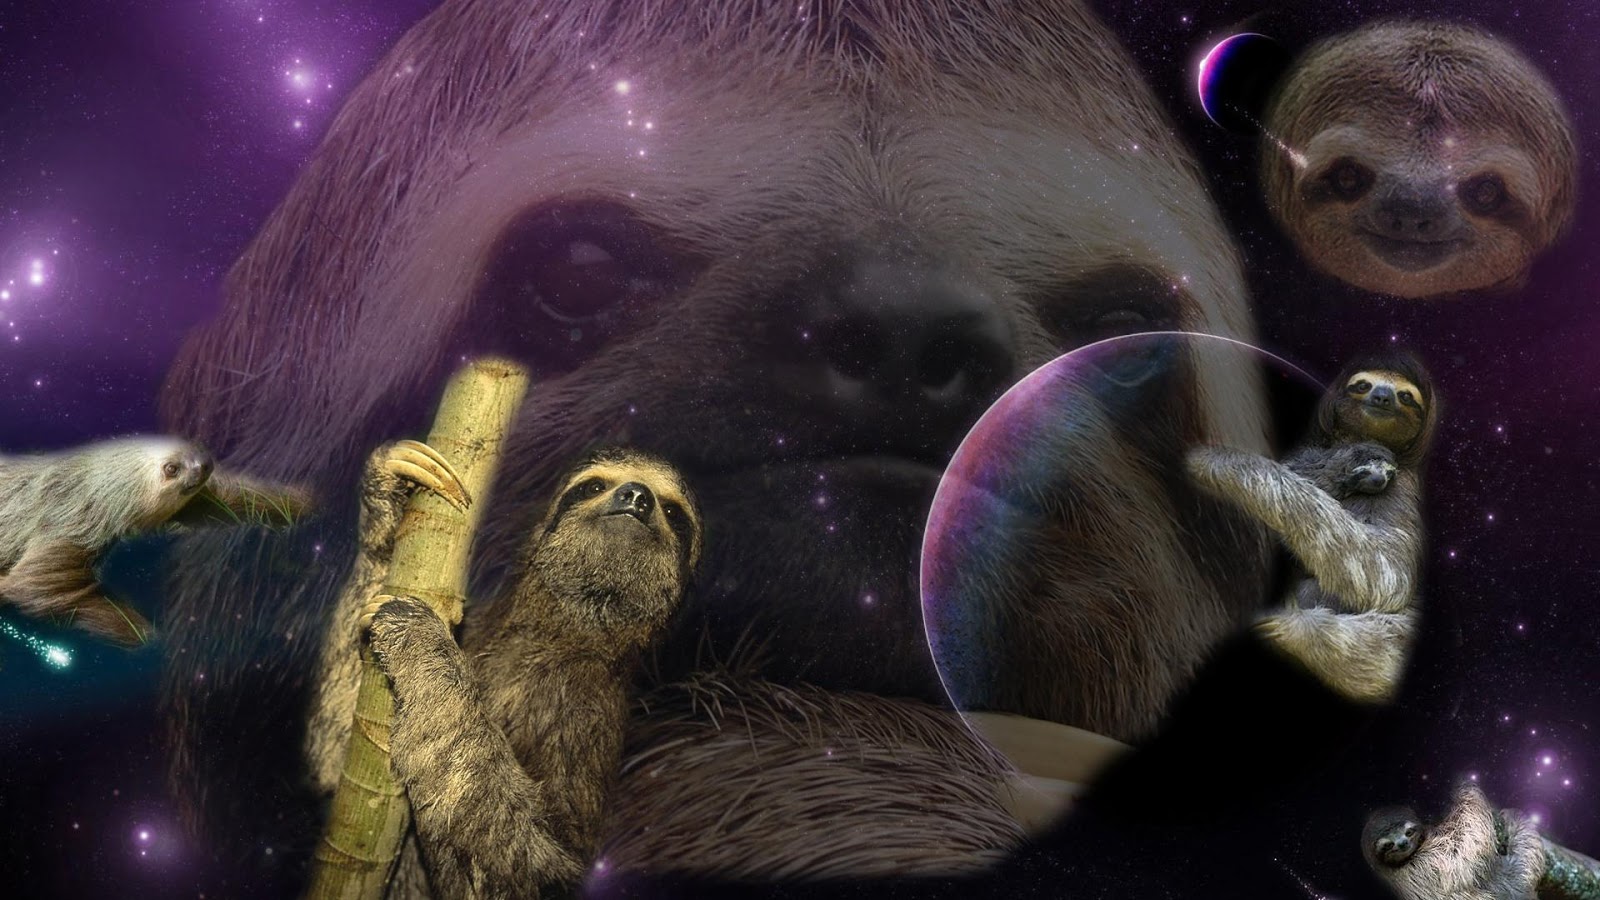 50+ 4K Sloth Wallpapers HD For PC (2019) | TopiBestList1600 x 900